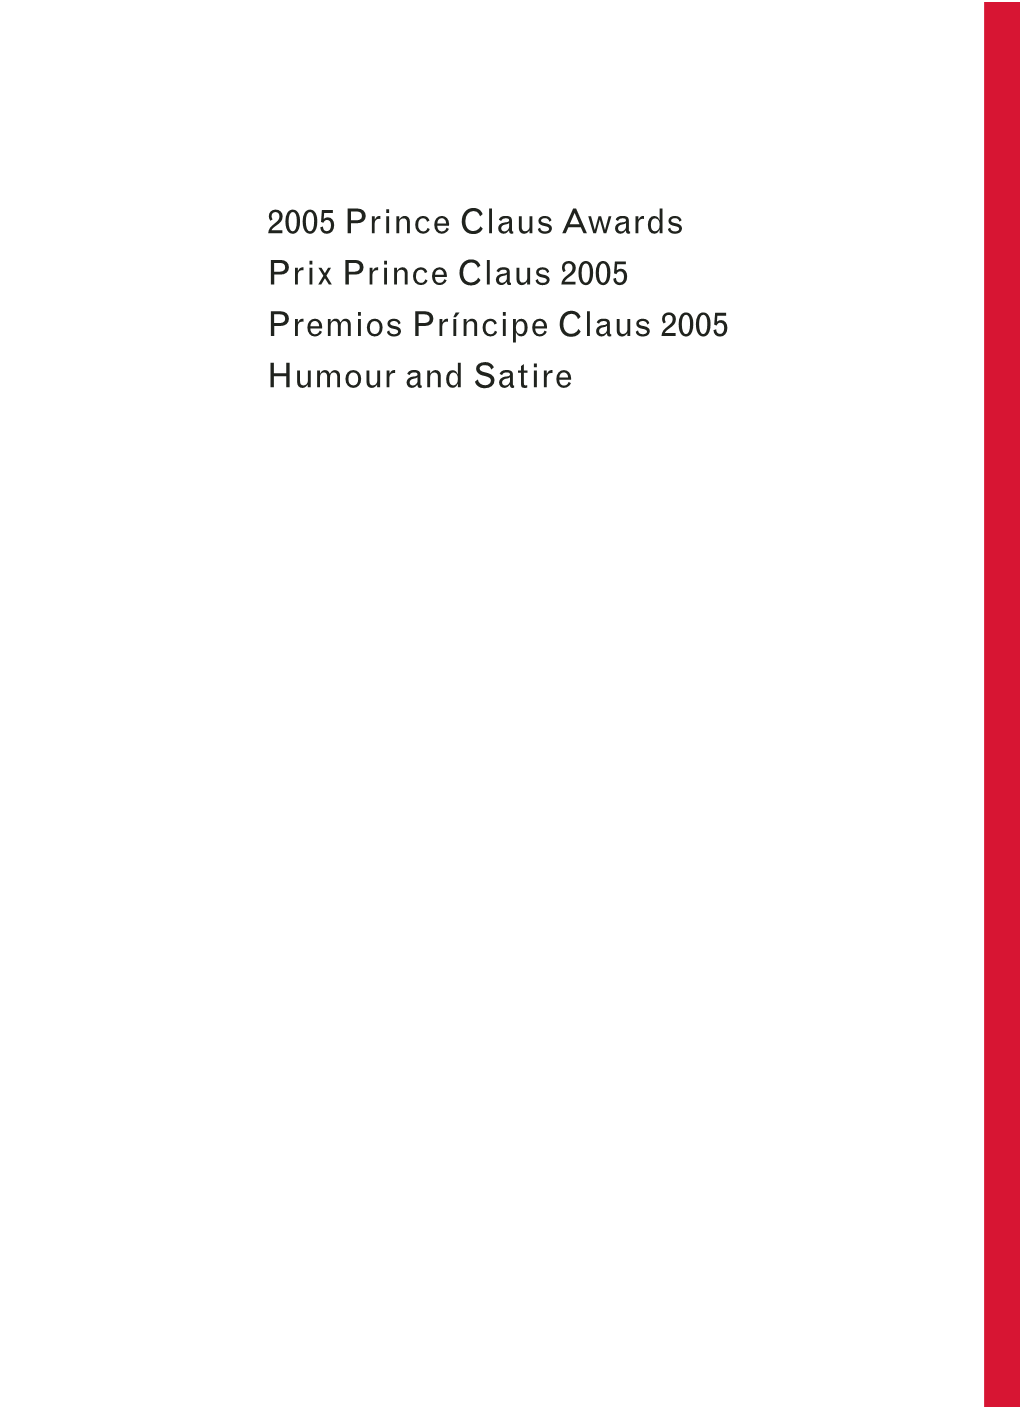 2005 Prince Claus Awards Humour and Satire